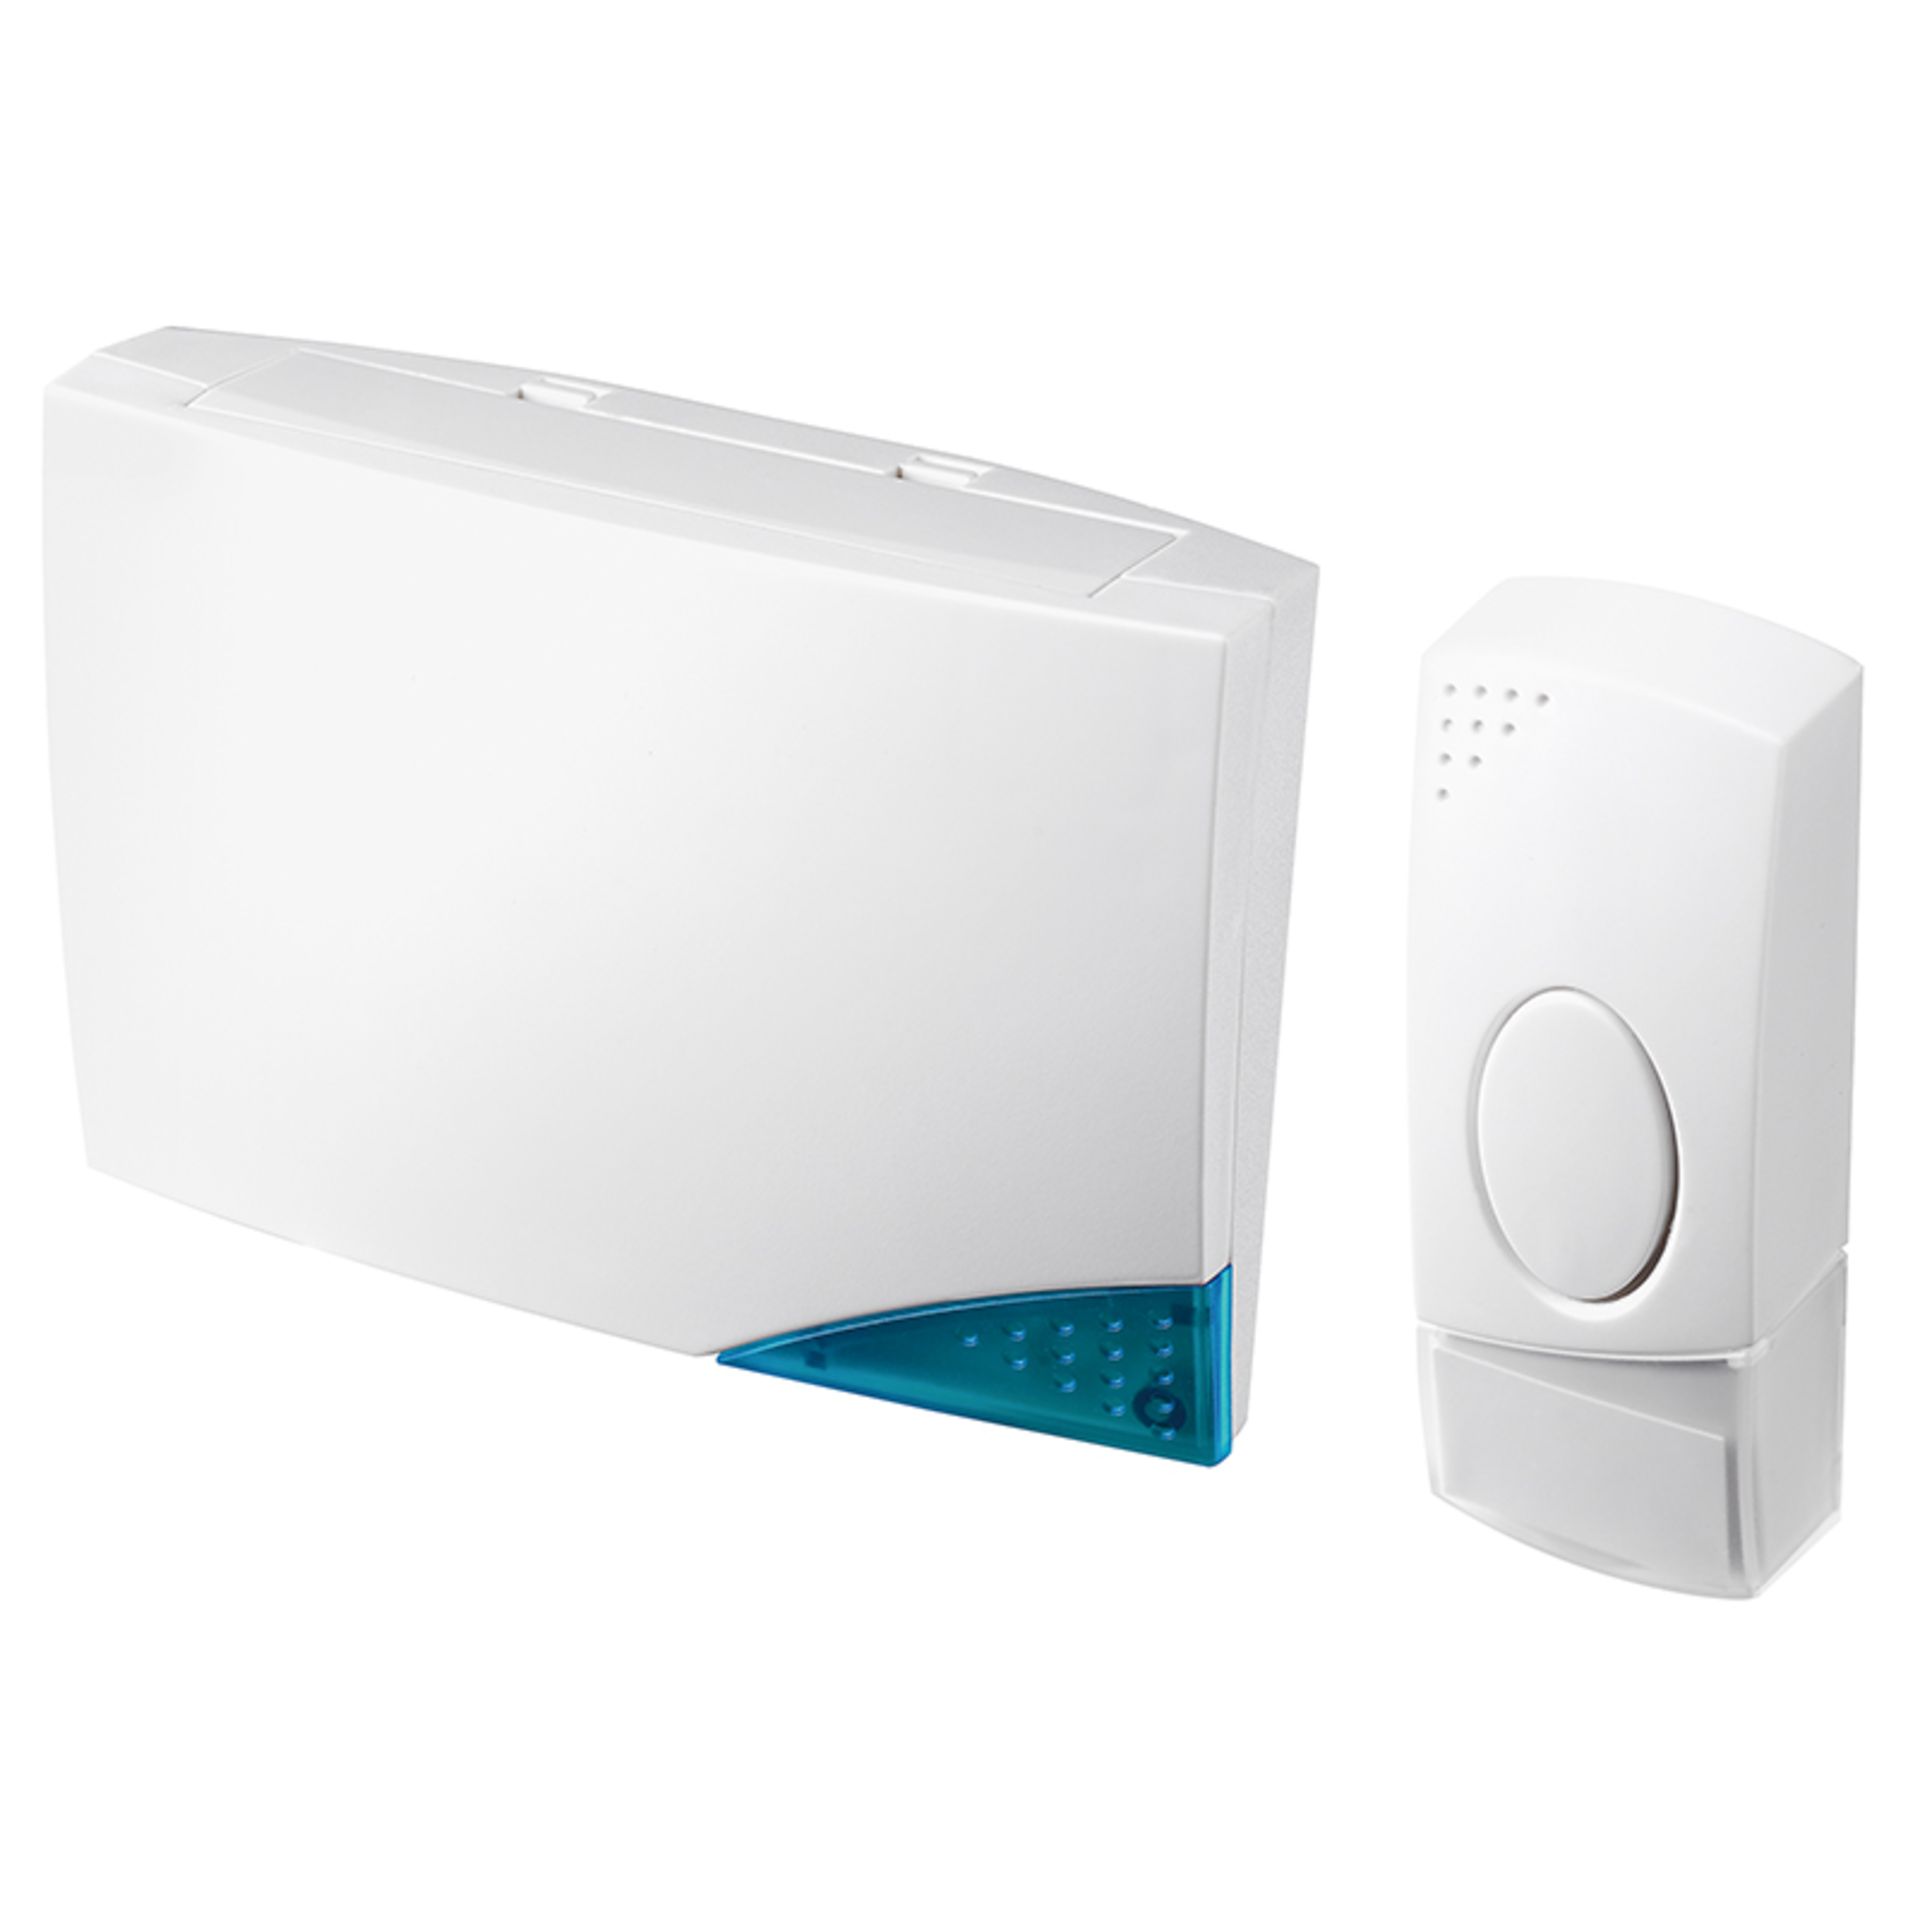 V Brand New Wireless Door Chime With Plug-In Receiver - 50m Range And Selectable Codes To Avoid